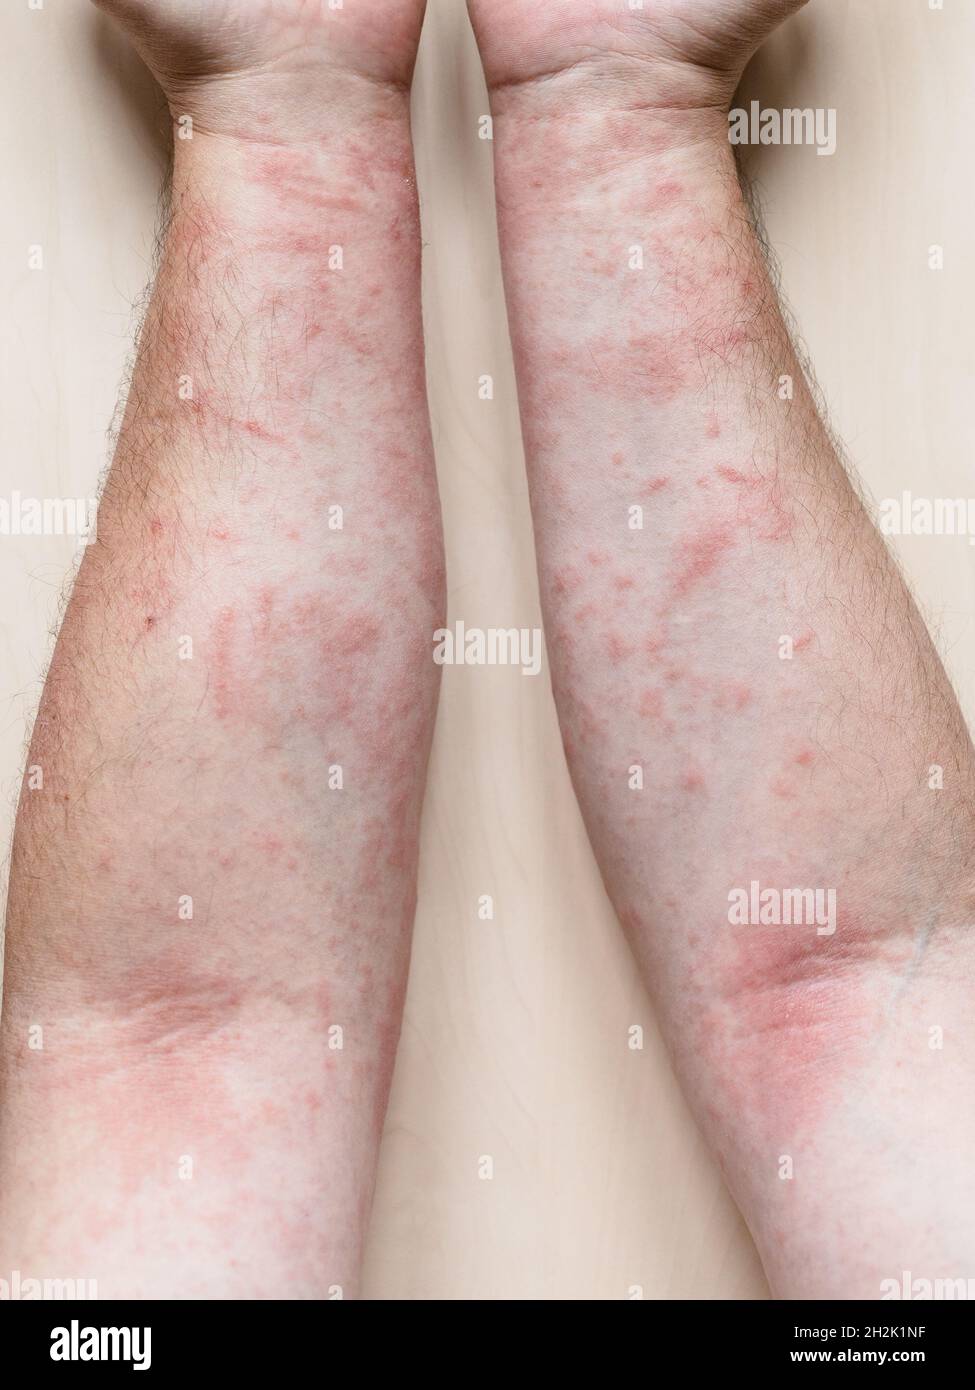 sample of Allergic contact dermatitis - male arms with itchy red rash Stock Photo